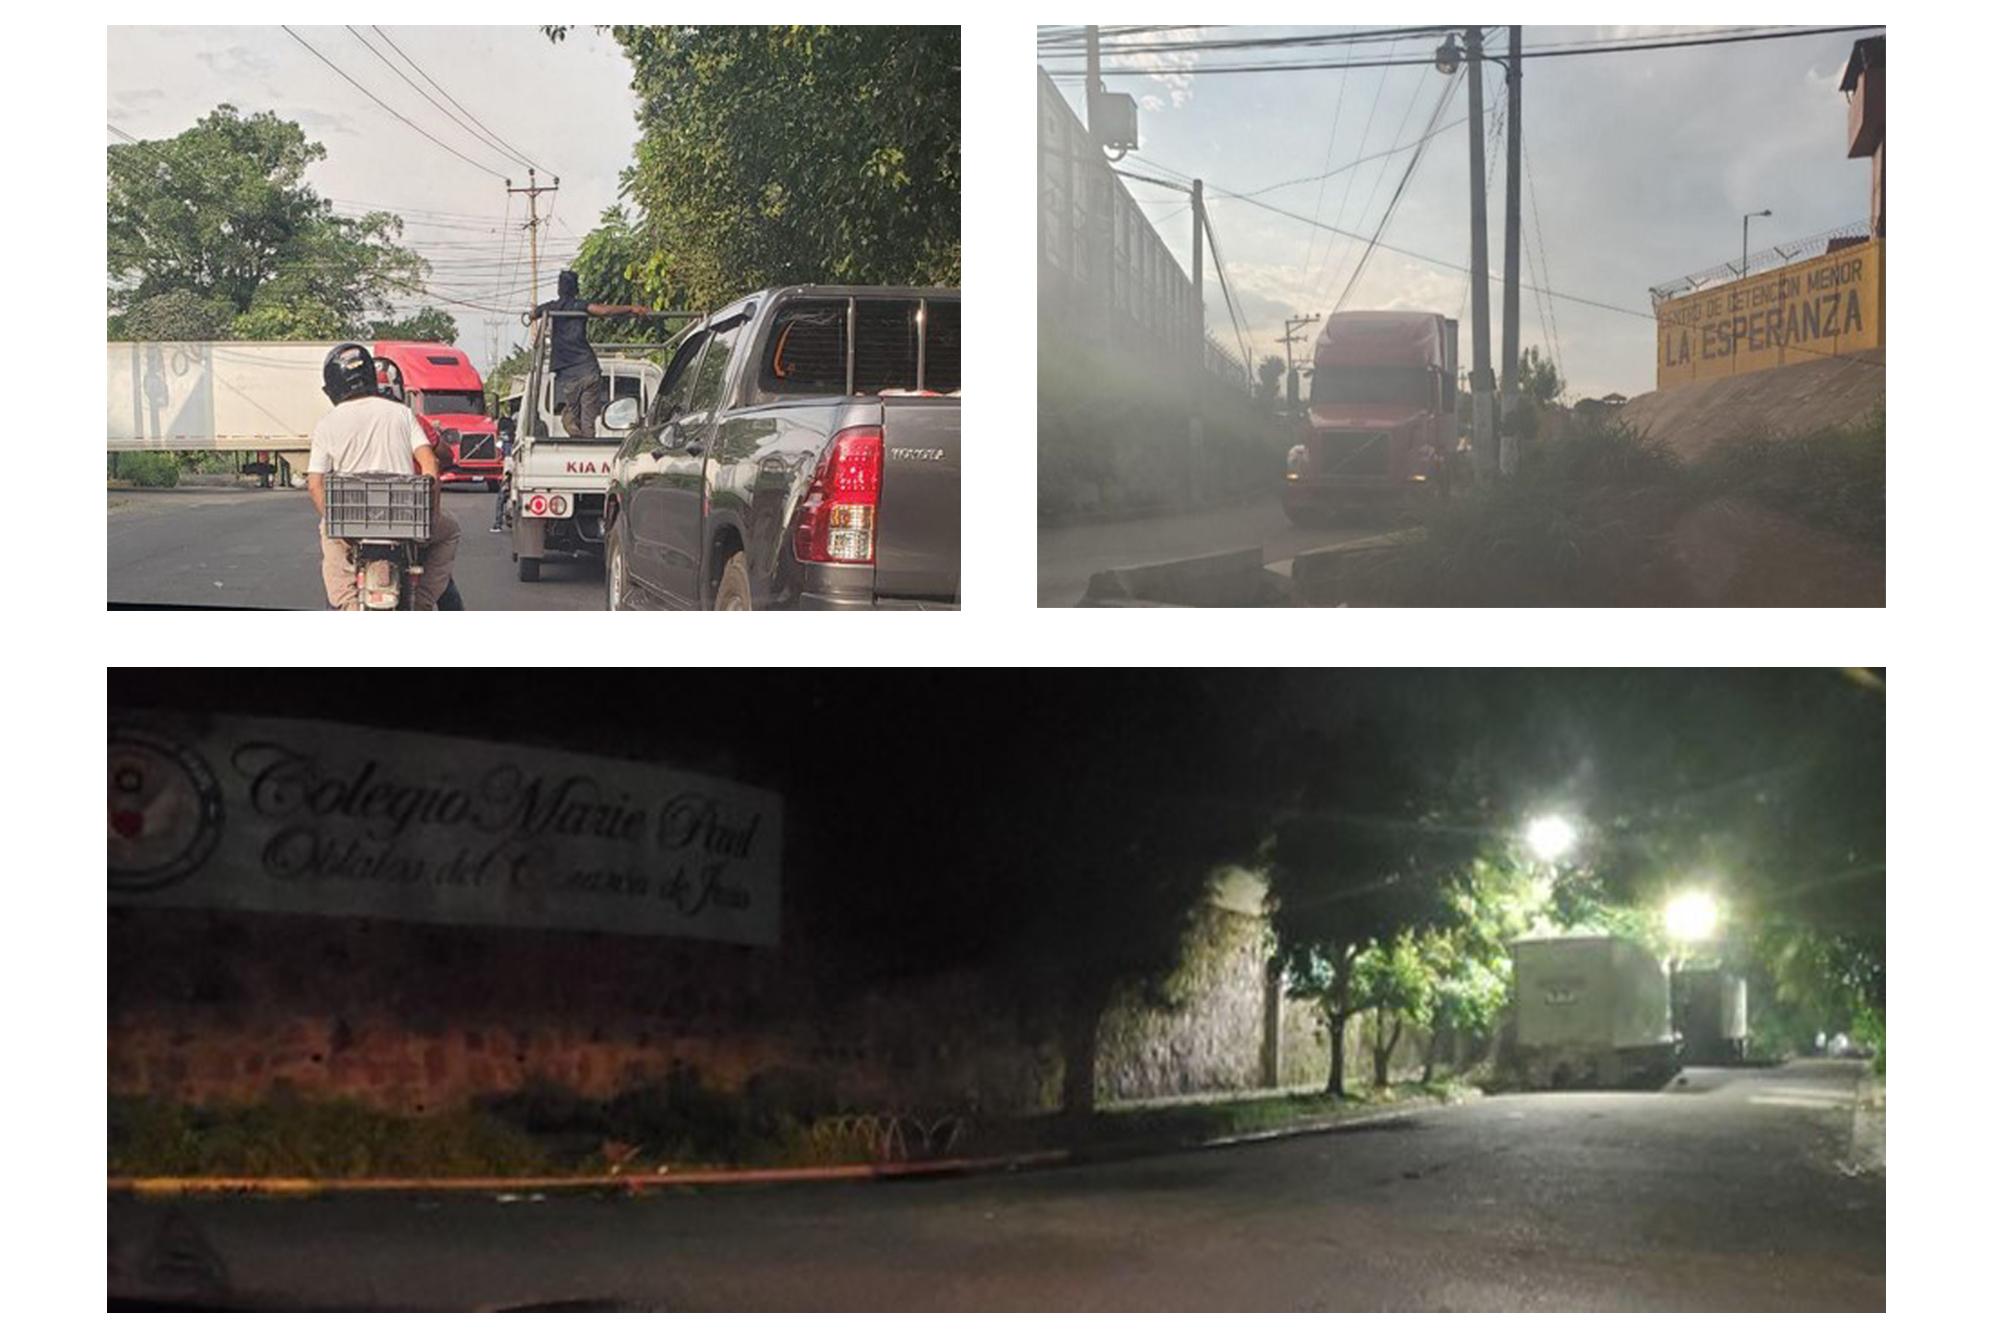 Top left: a trailer maneuvers to enter the Mariona prison on October 21, 2020: Top right, the trailer upon leaving the prison at 6:30 p.m. The bottom photo was taken a day after at the warehouse where the food sacks were unloaded. The photos were taken by investigators with the Attorney General’s Office.